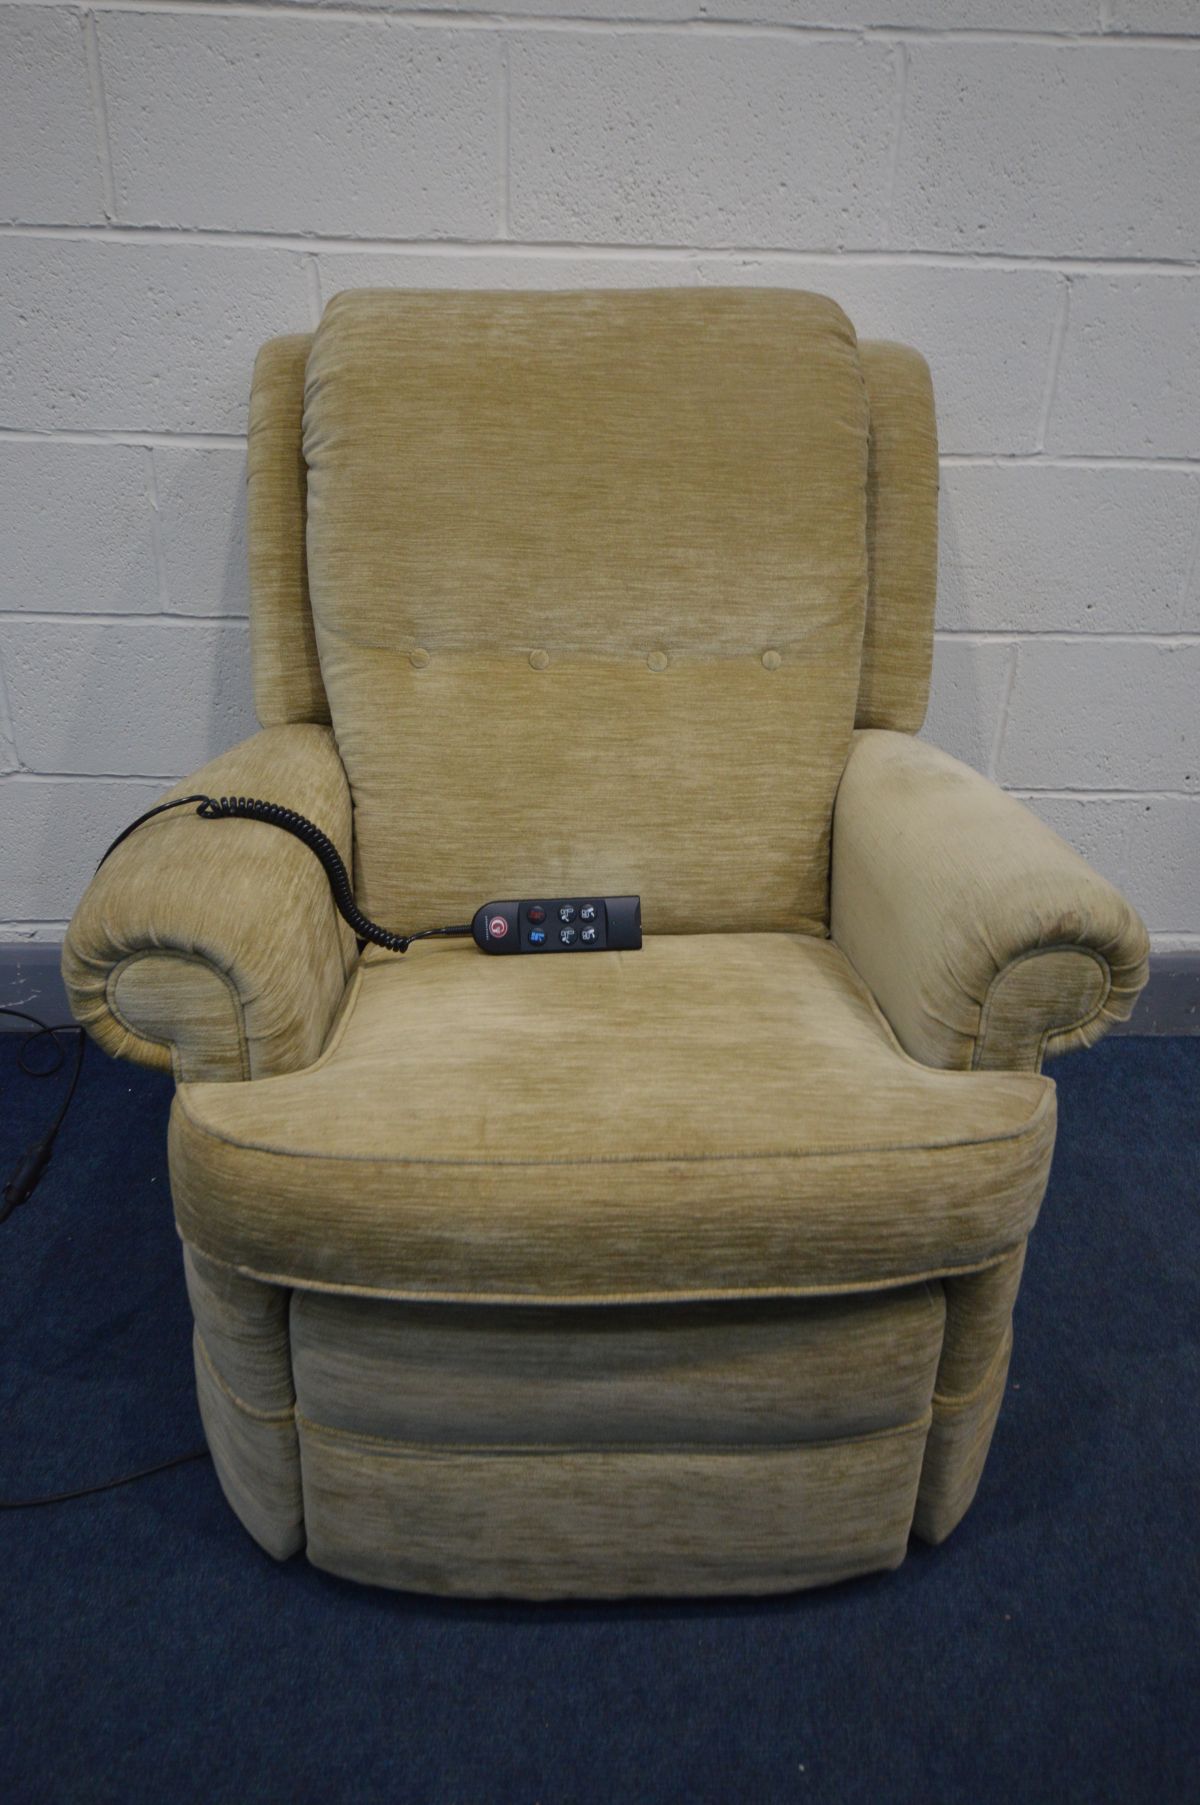 A G PLAN BEIGE UPHOLSTERED ELECTRIC RISE AND RECLINE ARMCHAIR (PAT pass and working) - Image 2 of 5